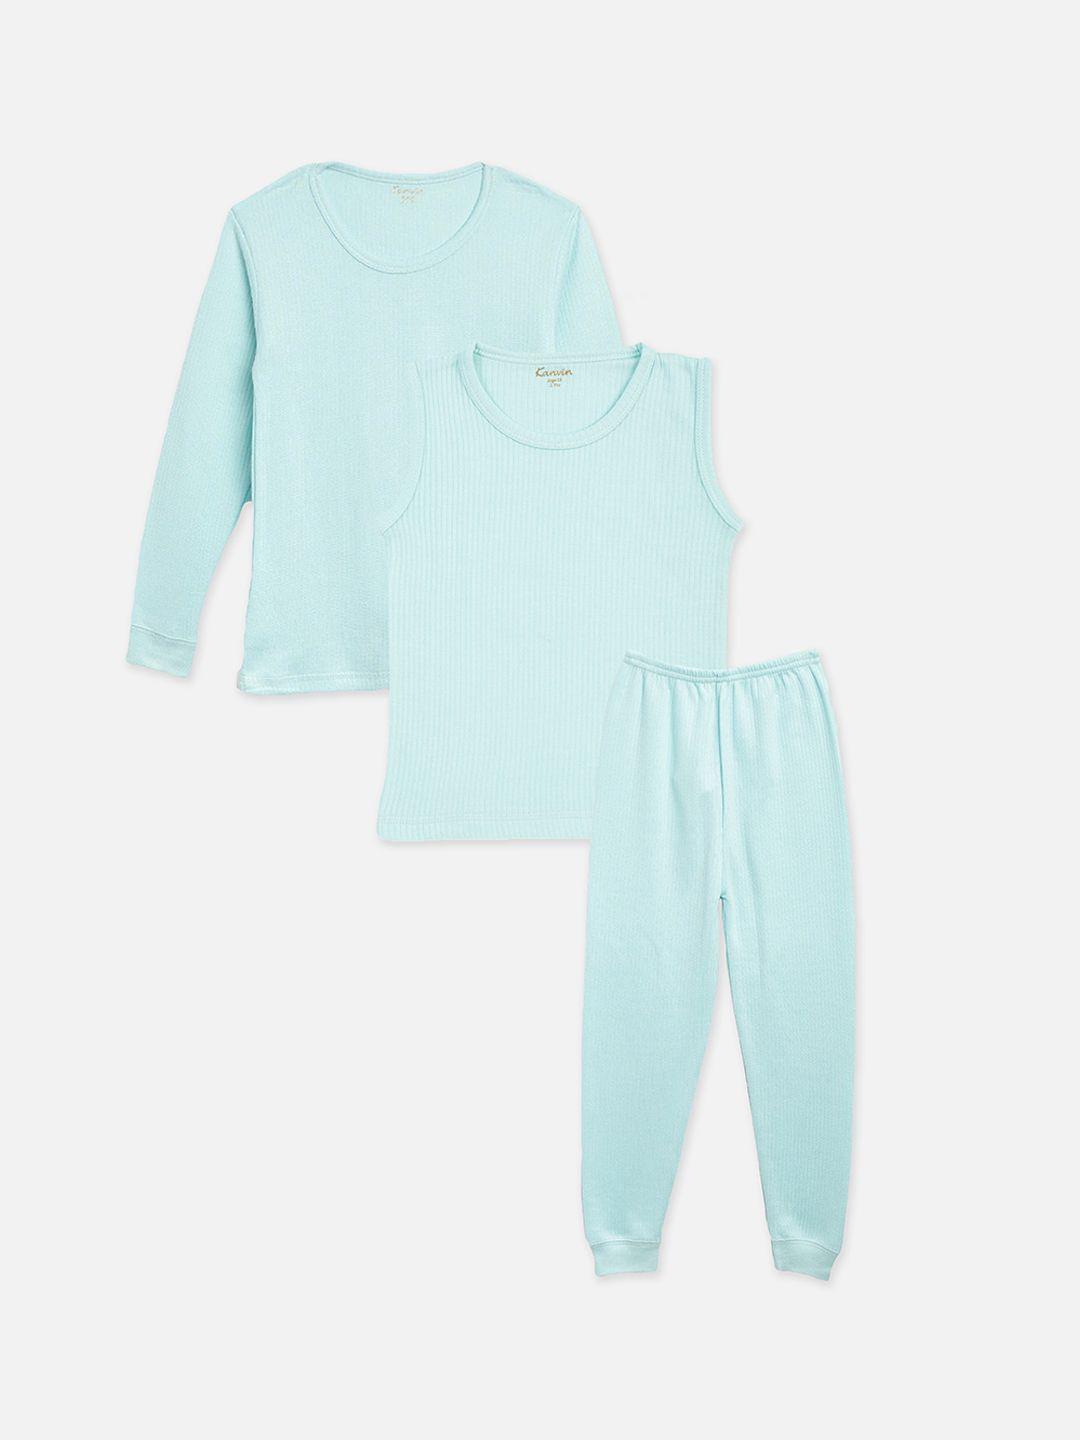 kanvin-boys-turquoise-blue-striped-thermal-set